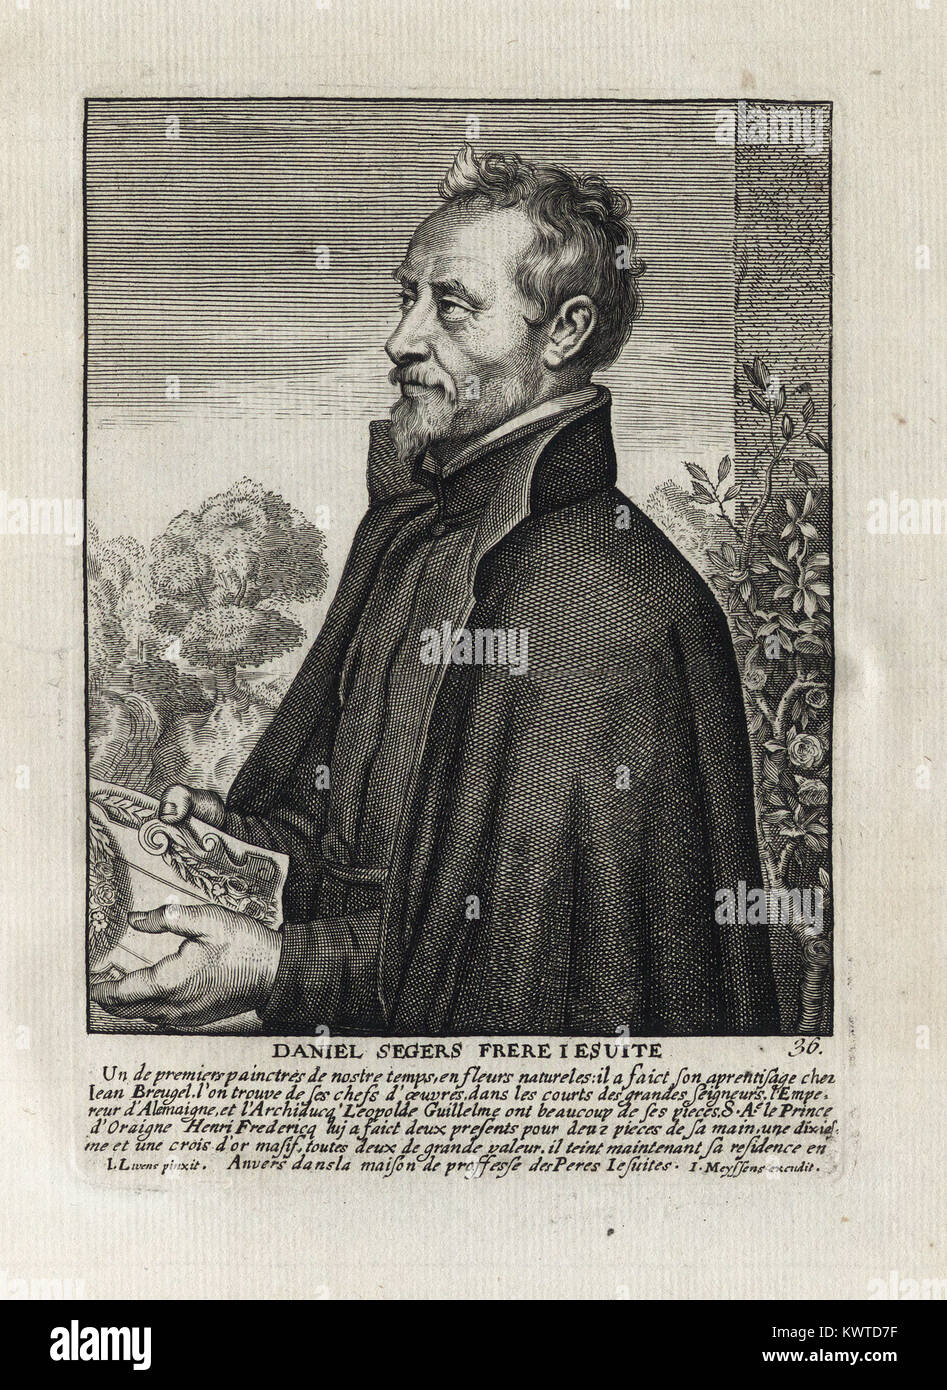 DANIEL SEGERS FRERE JESUITE - Woodcut portrait and short biography (old french language) - Engraving 17th century Stock Photo